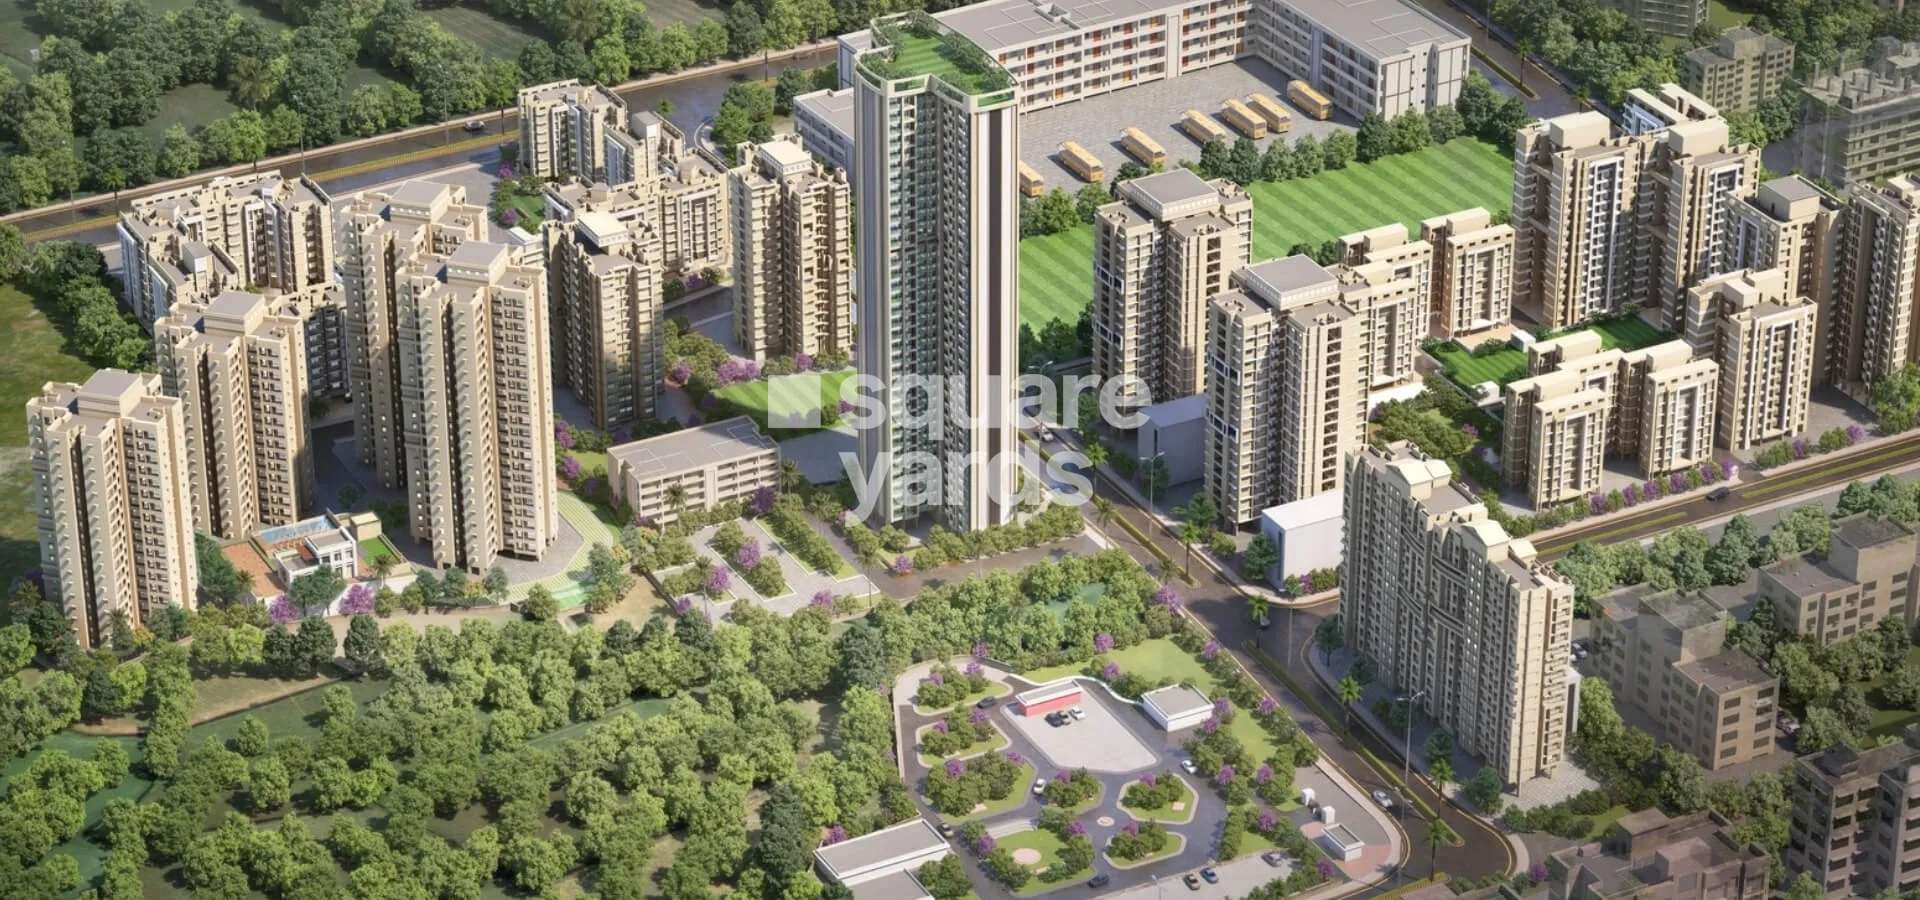 raunak unnathi woods project tower view6 3147